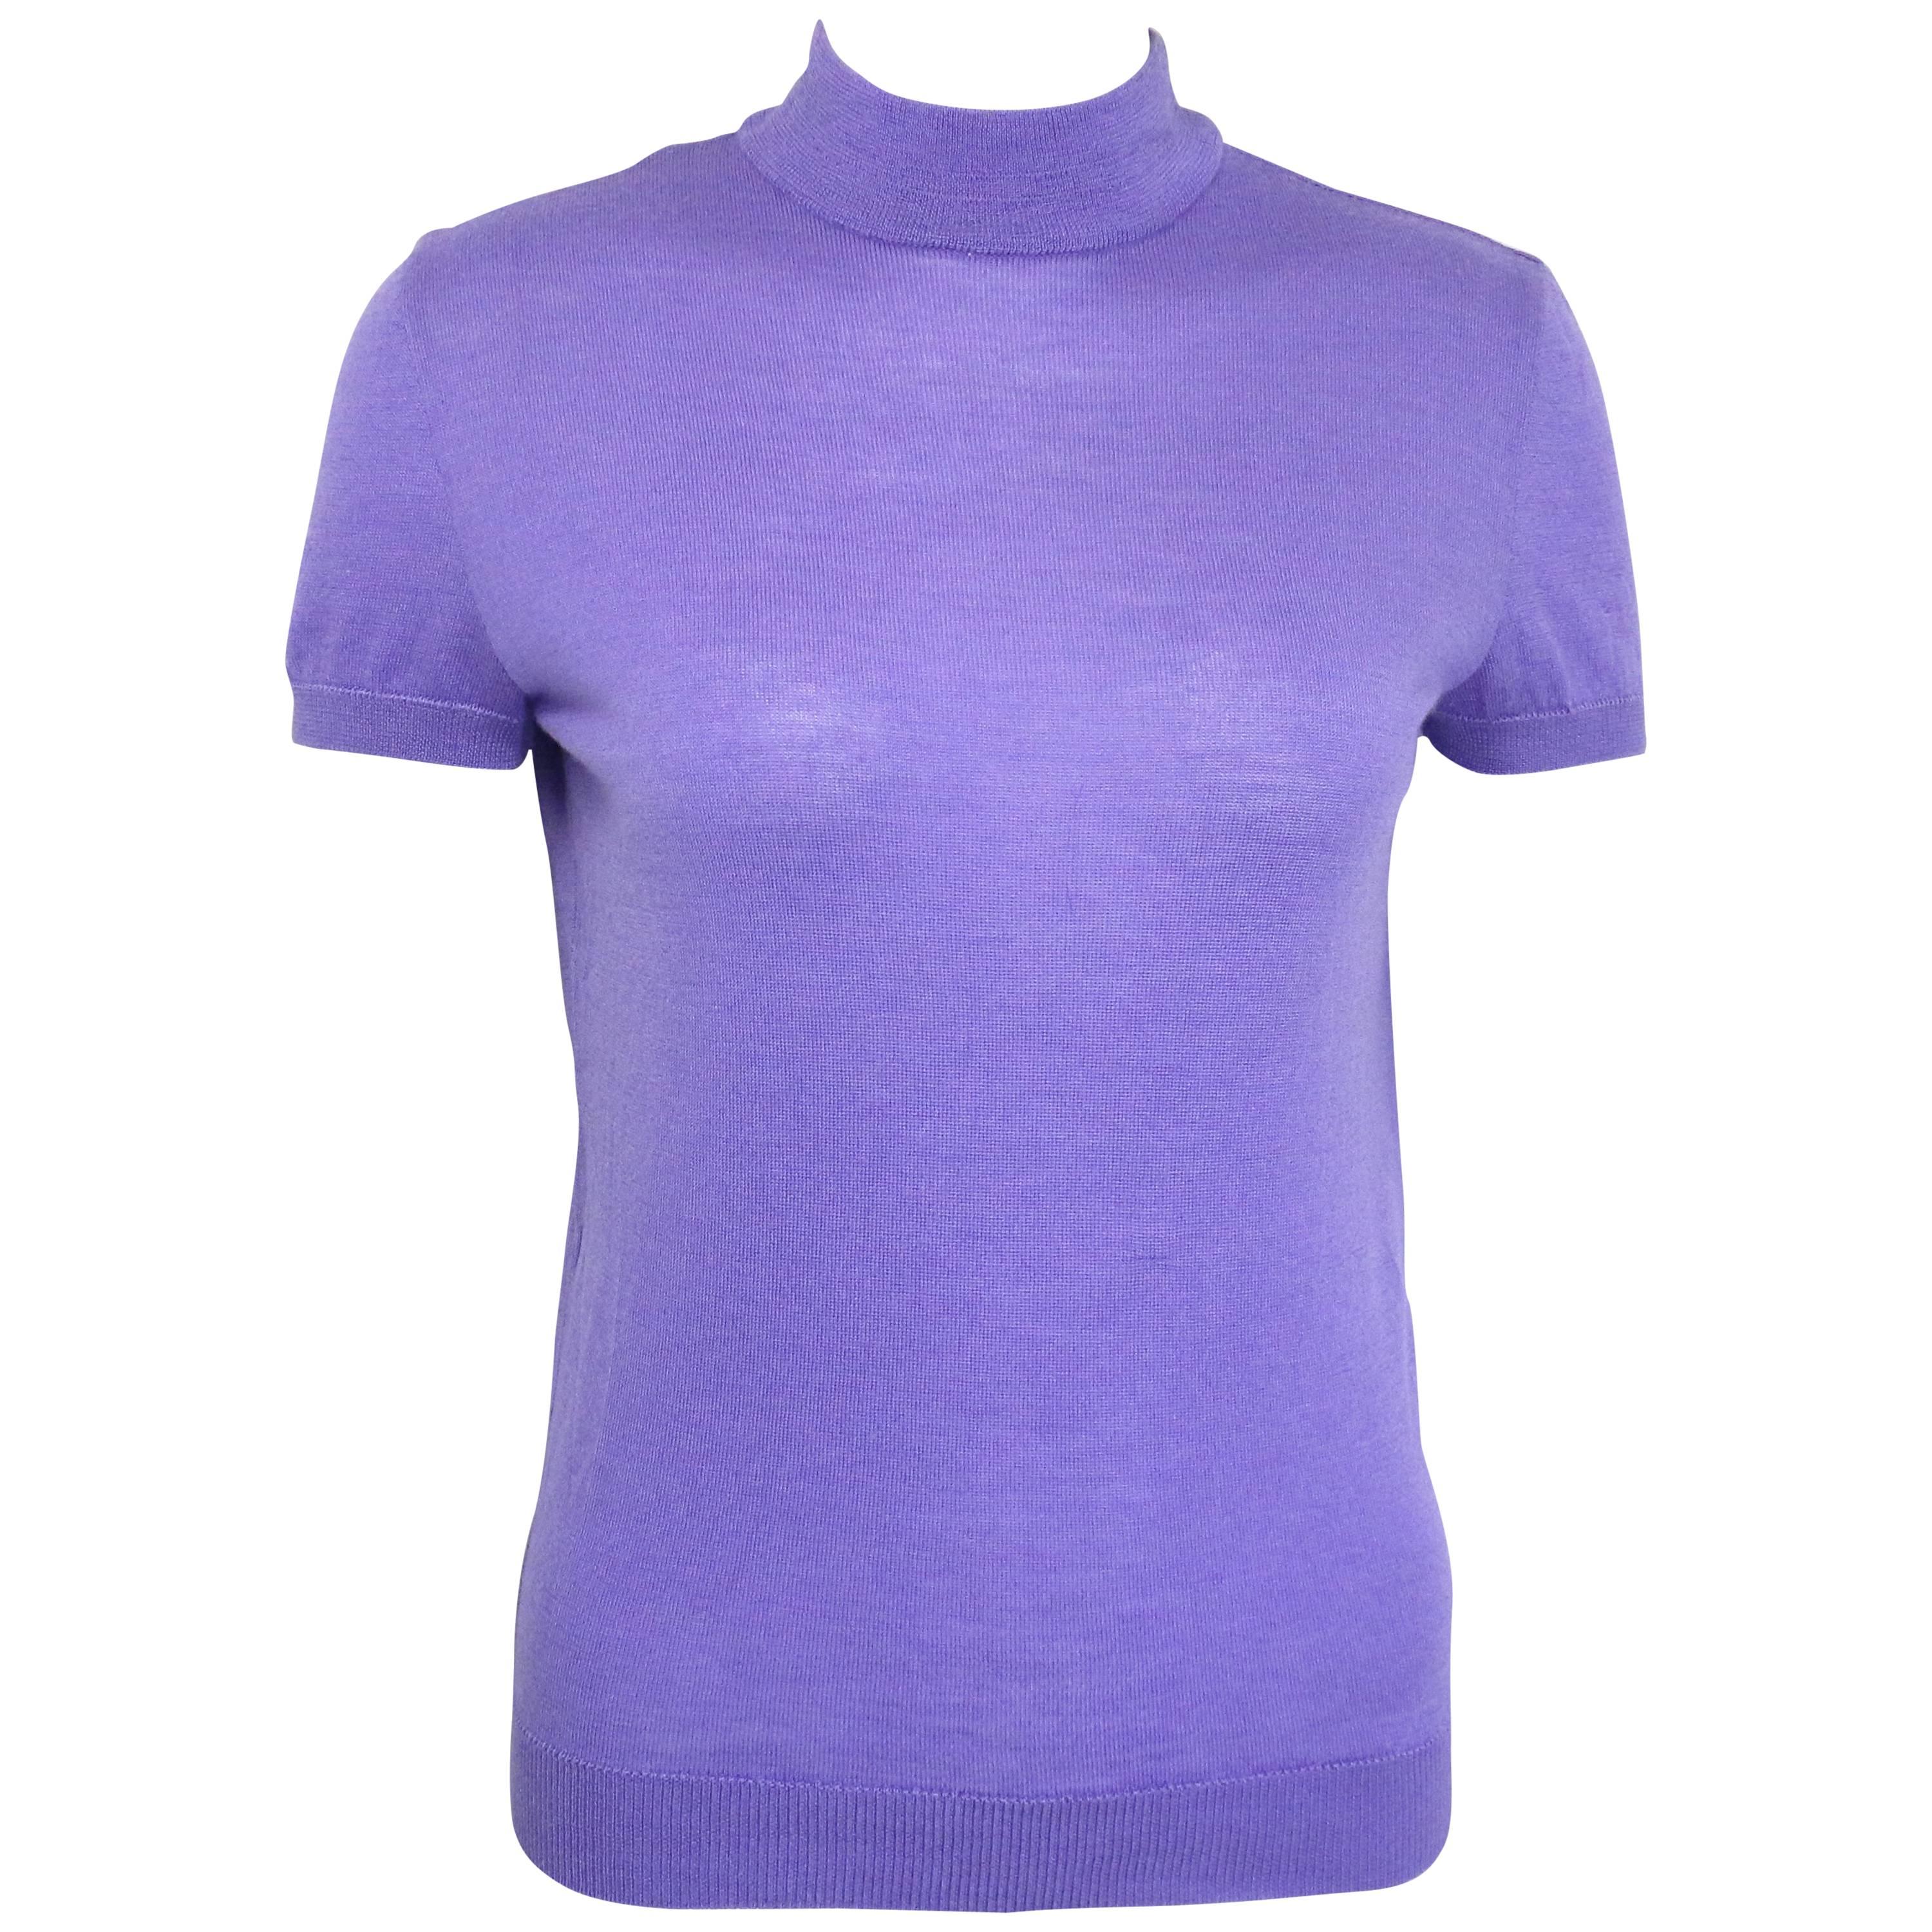 90s Gianni Versace Couture Purple Cashmere and Wool Mock Neck Short Sleeves Top